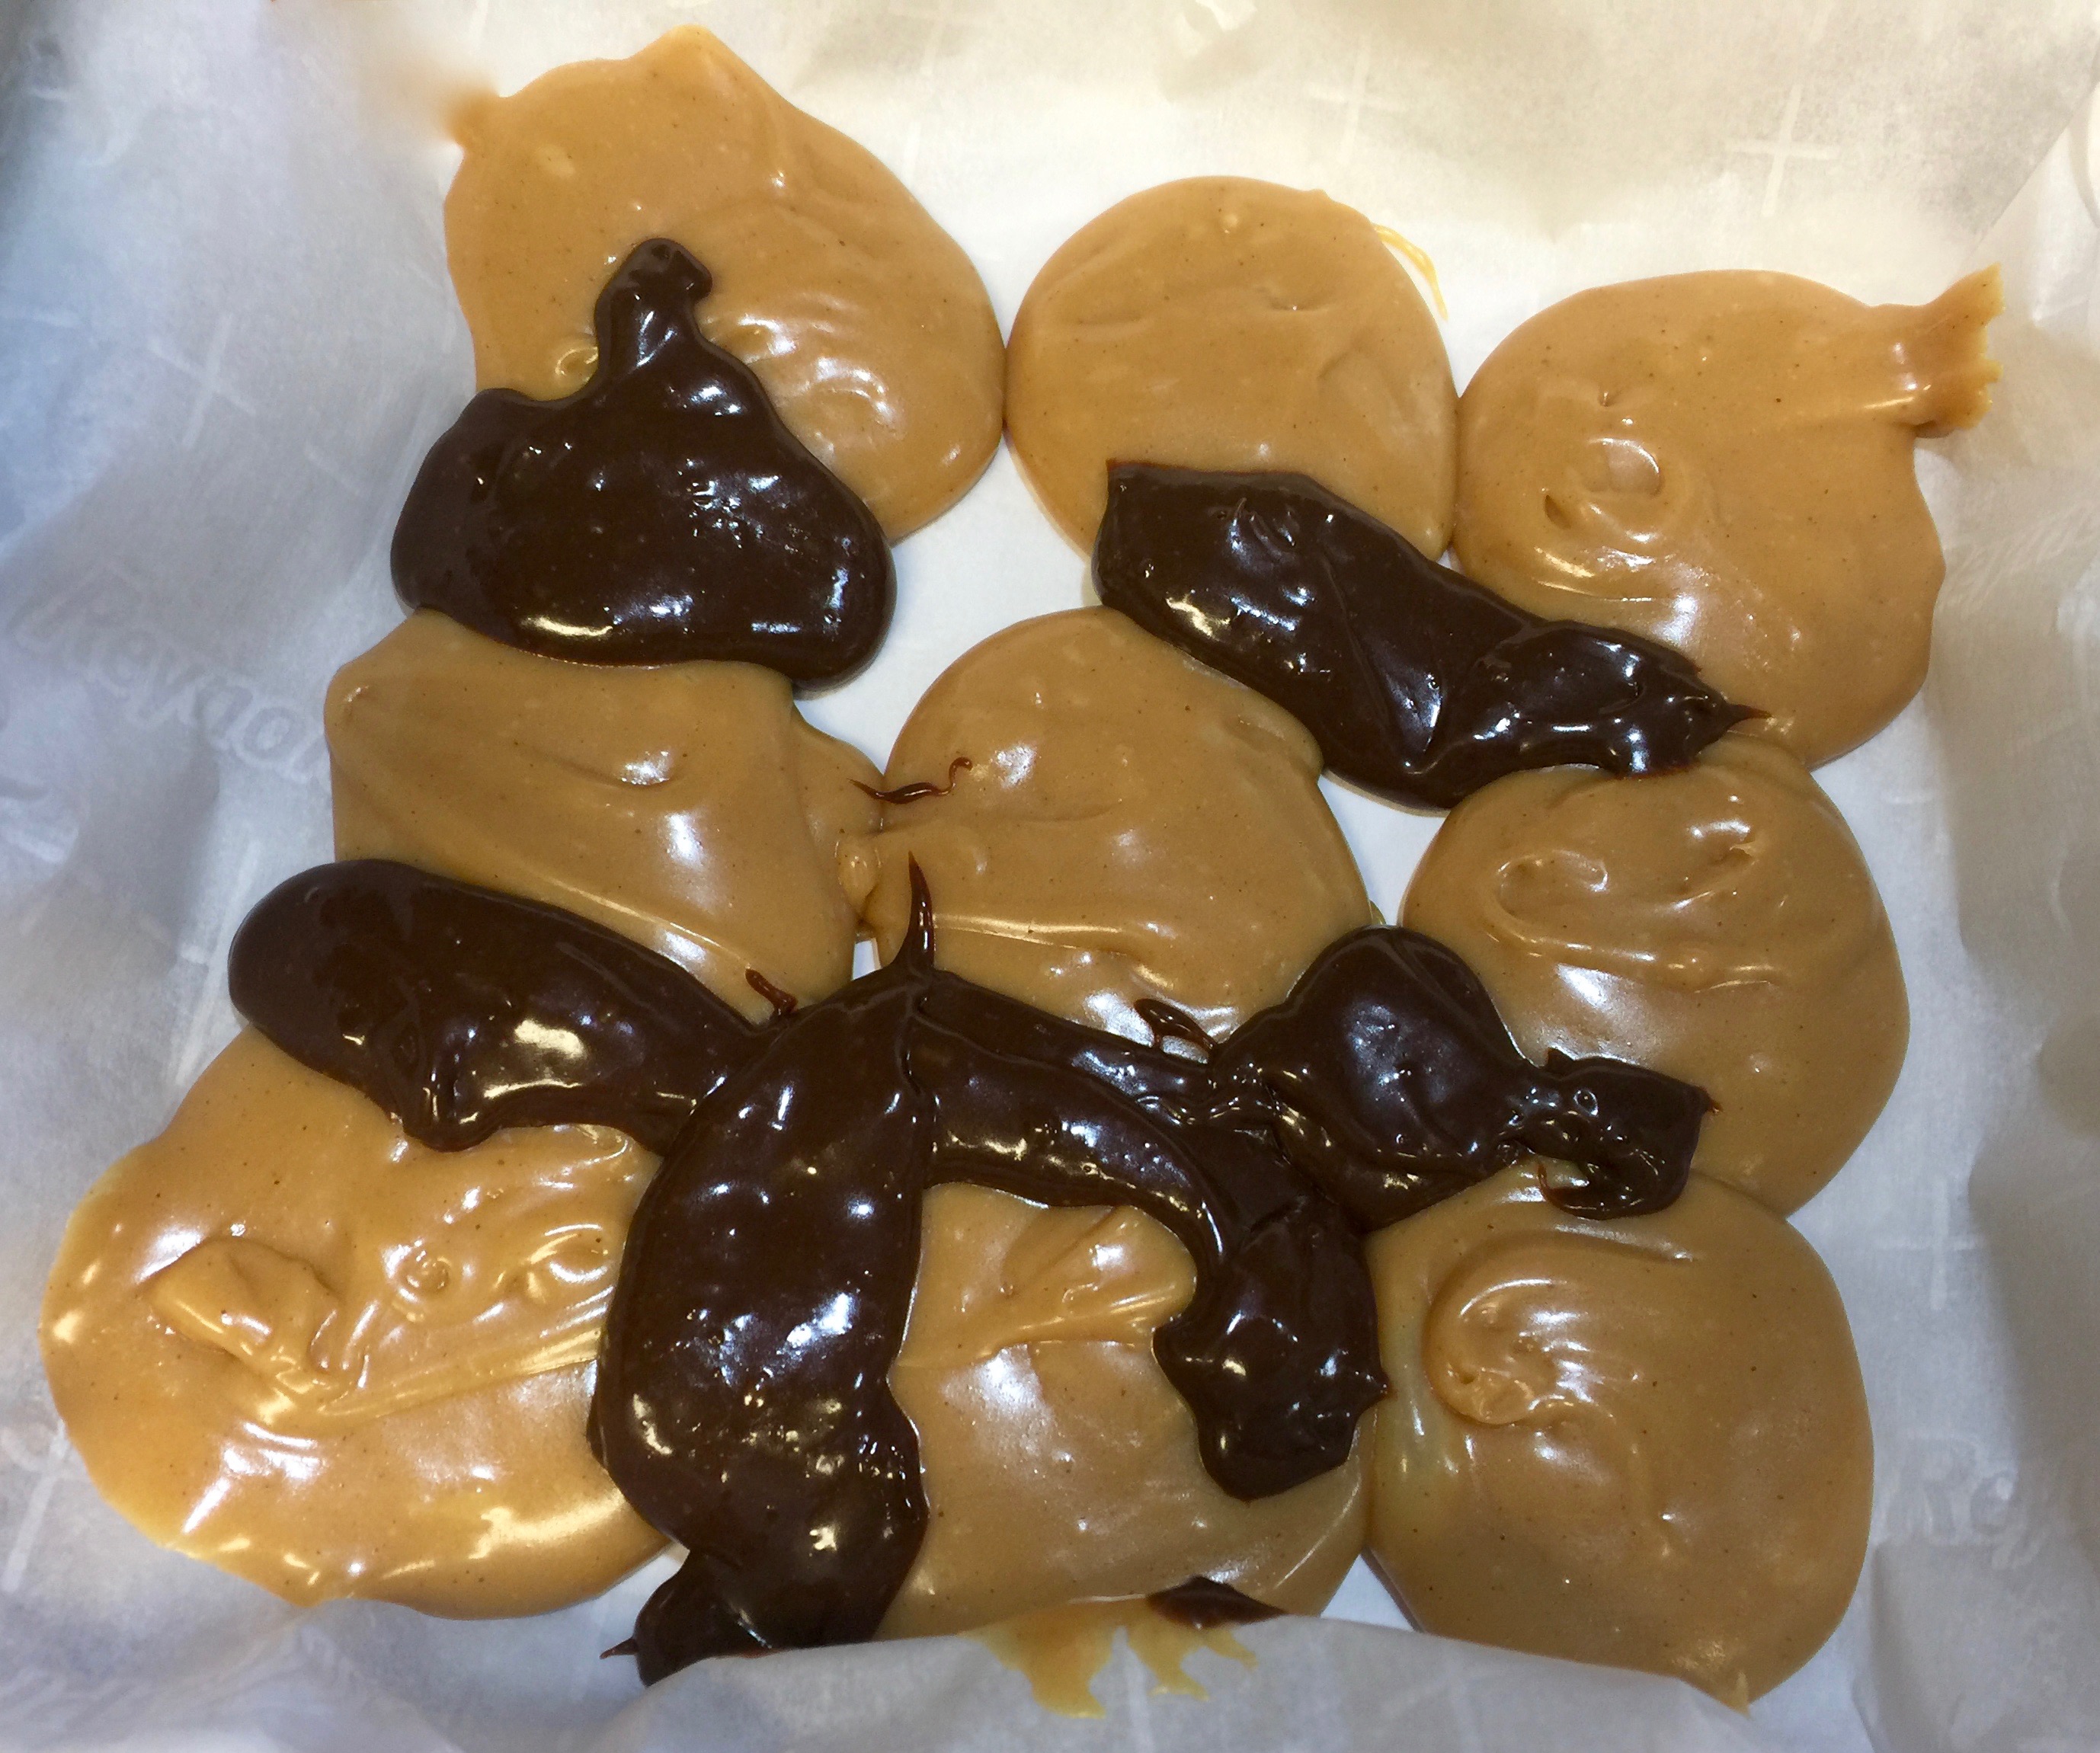 Peanut butter and chocolate dollops